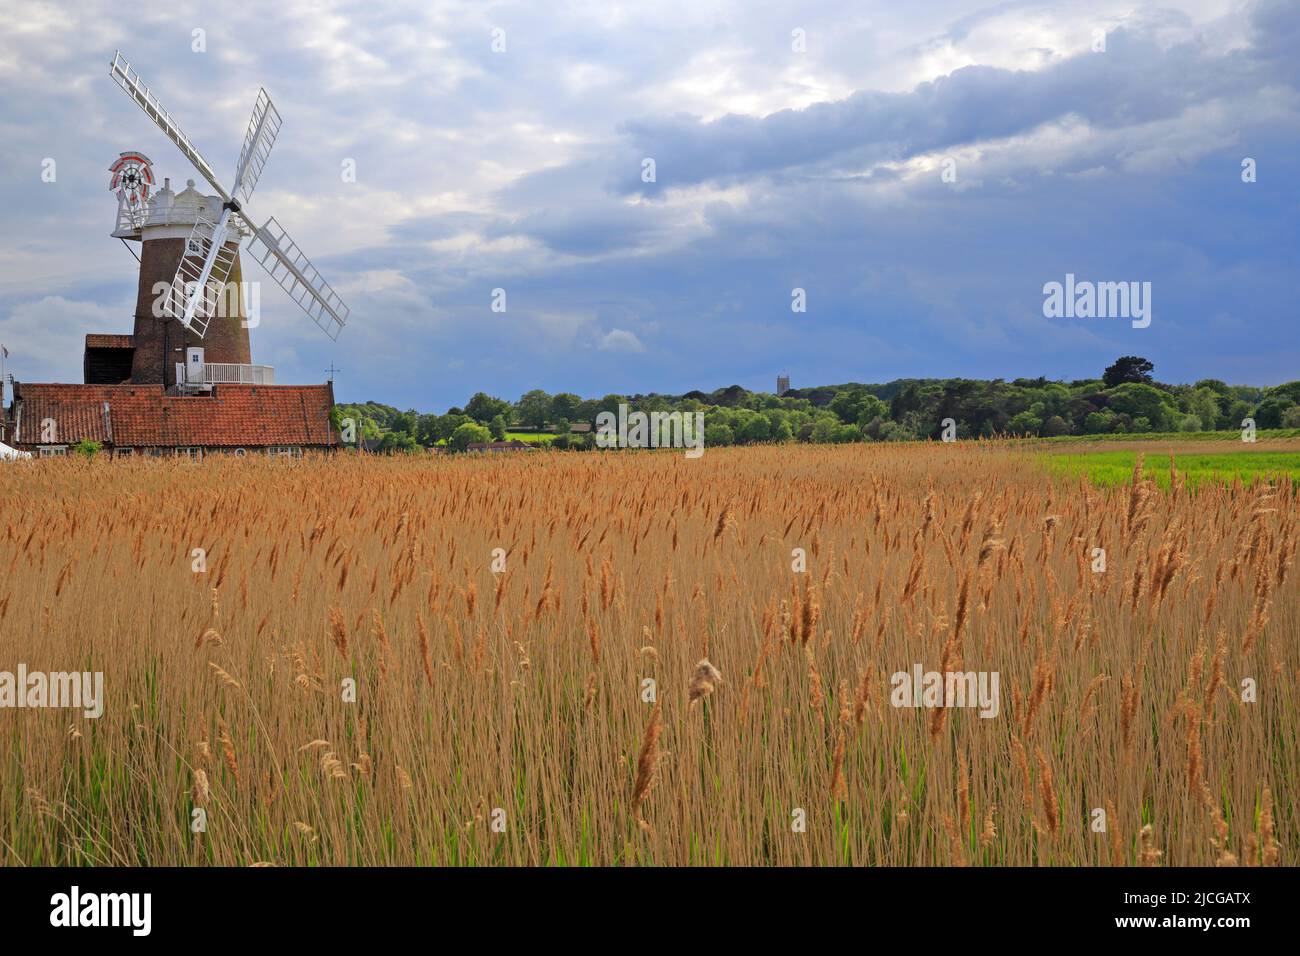 Cley windmill by the River Glaven on the Peddars Way and Norfolk Coast Path, Cley on the Sea, Norfolk, England, UK. Stock Photo